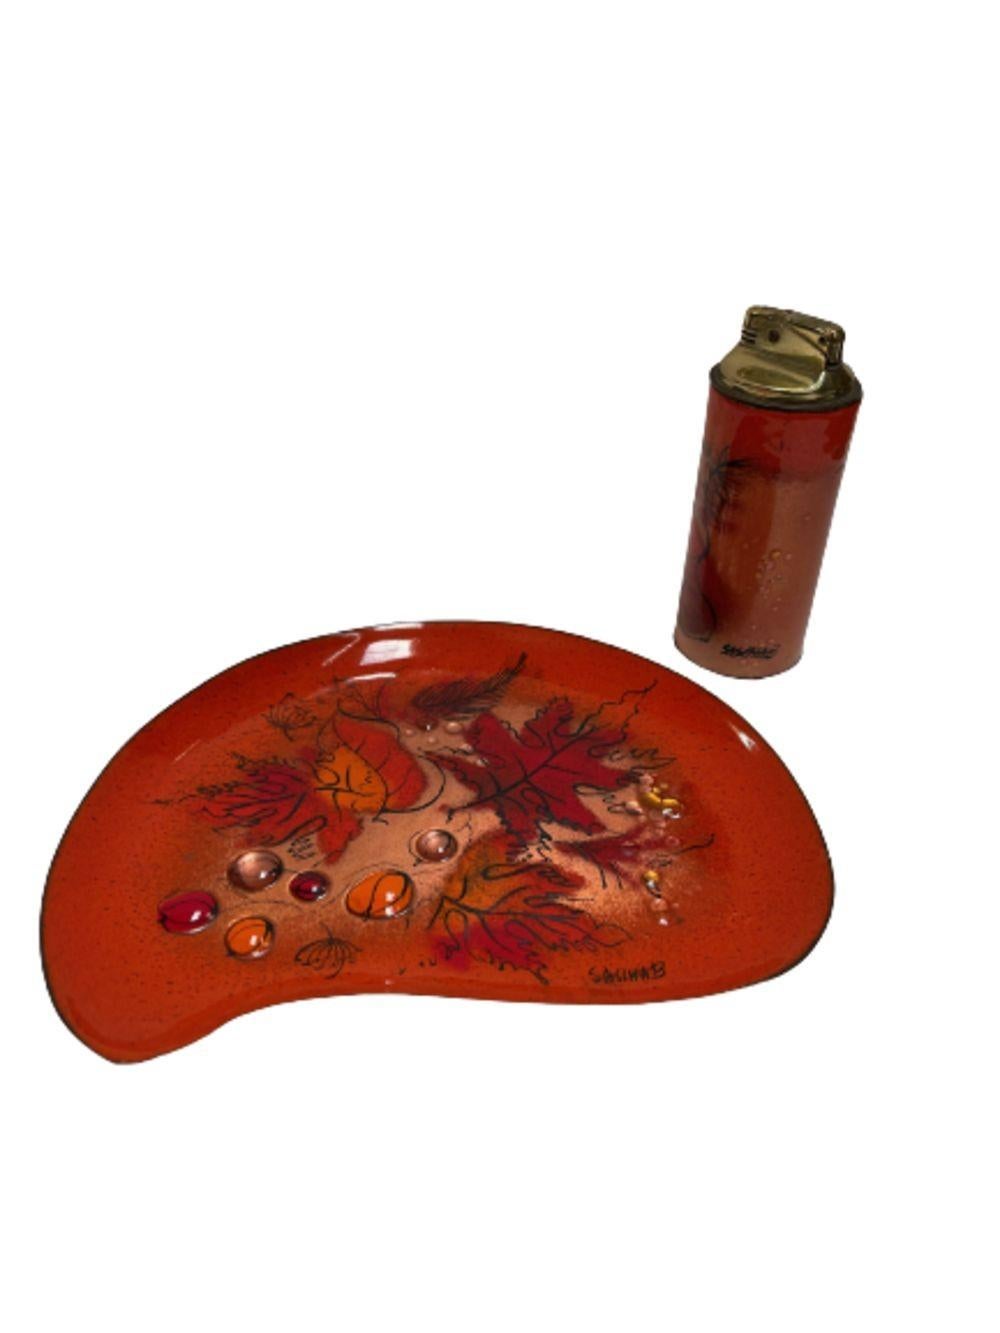 Original matching enameled brass cloisonne Ashtray and Lighter featuring an Autumn, Fall scene of changing leaves by Sascha Brastoff. The ashtray features a biomorphic shape hand painted fall maple leaves with the matching gas lighter featuring the